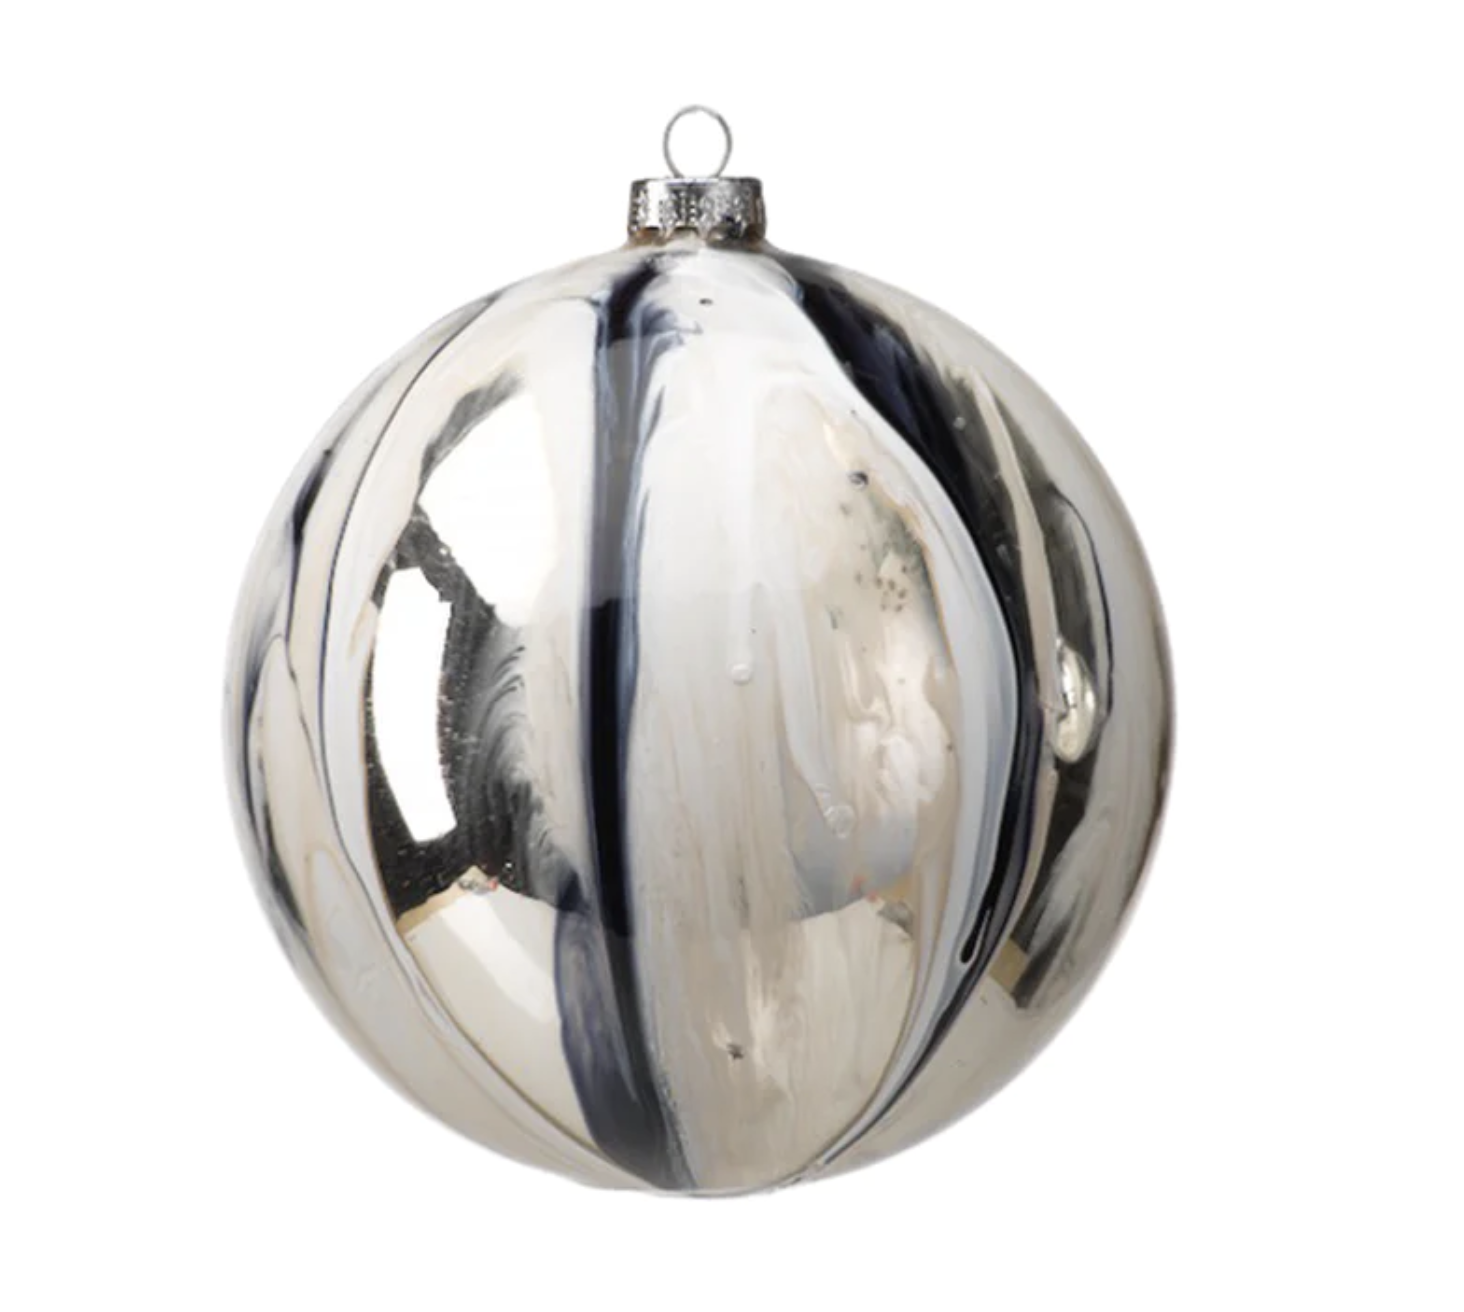 ZODAX SHINY WHITE/SILVER BALL ORNAMENT- LARGE